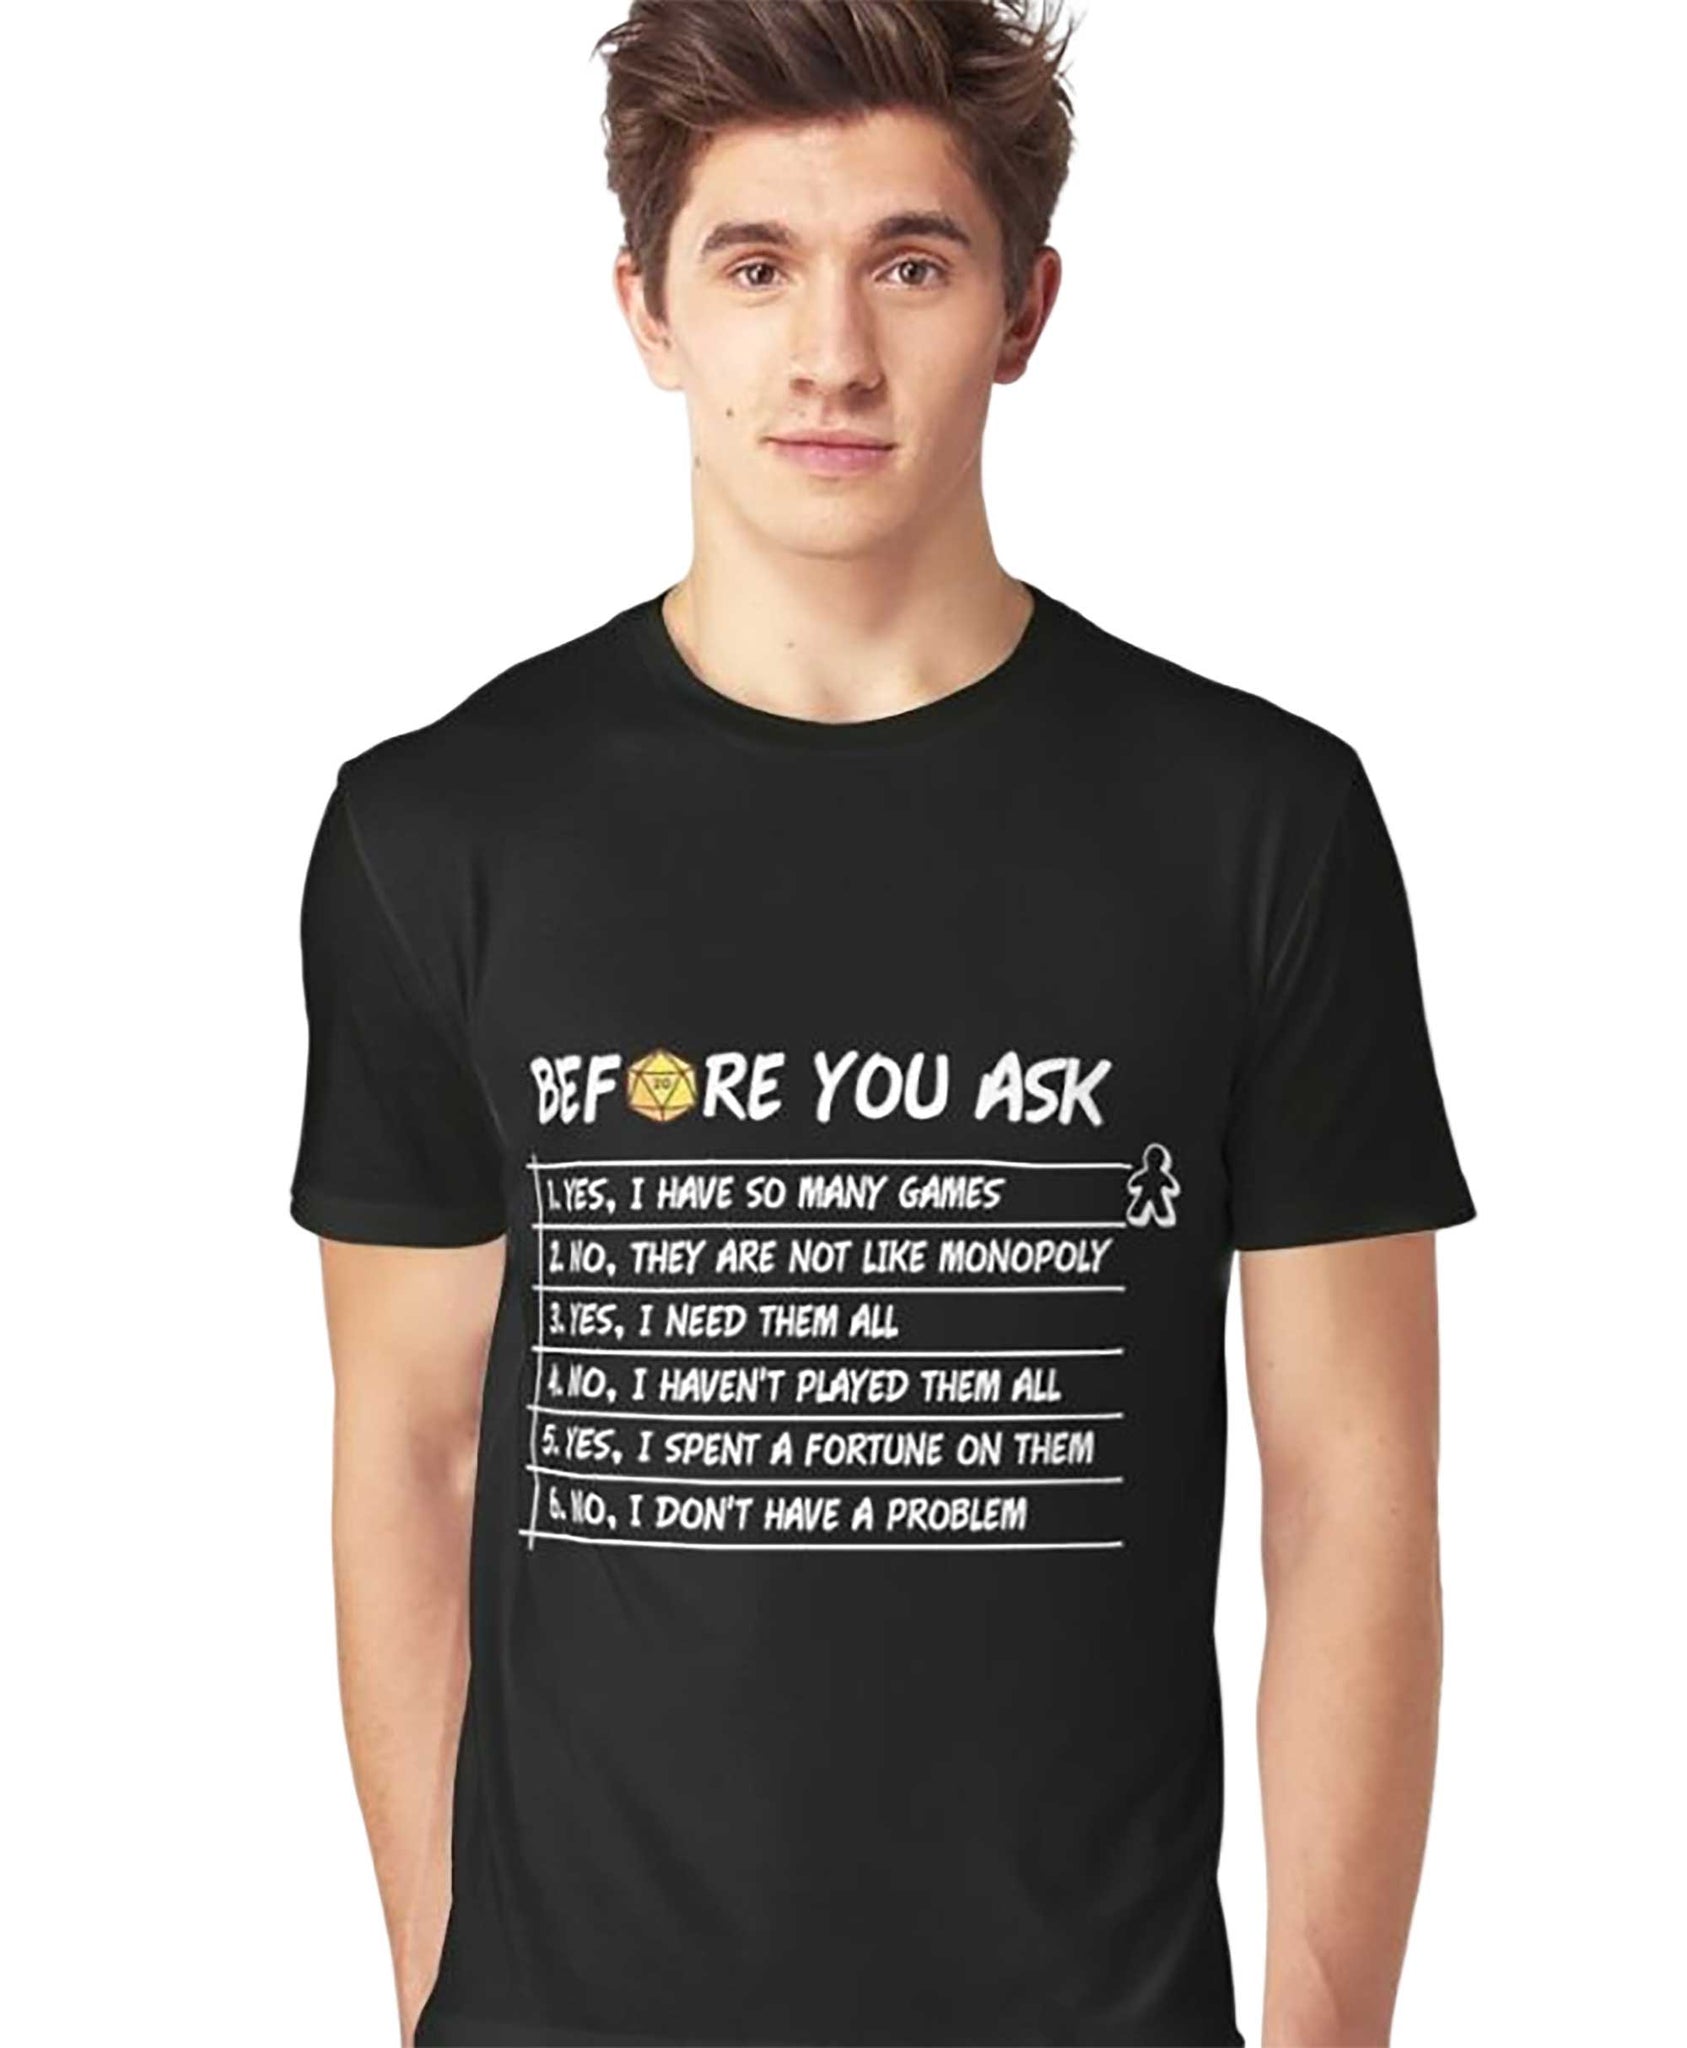 Skitongift-Before-You-Ask-Funny-Board-Game-Classic-T-Shirt-Funny-Shirts-Hoodie-Sweater-Short-Sleeve-Casual-Shirt